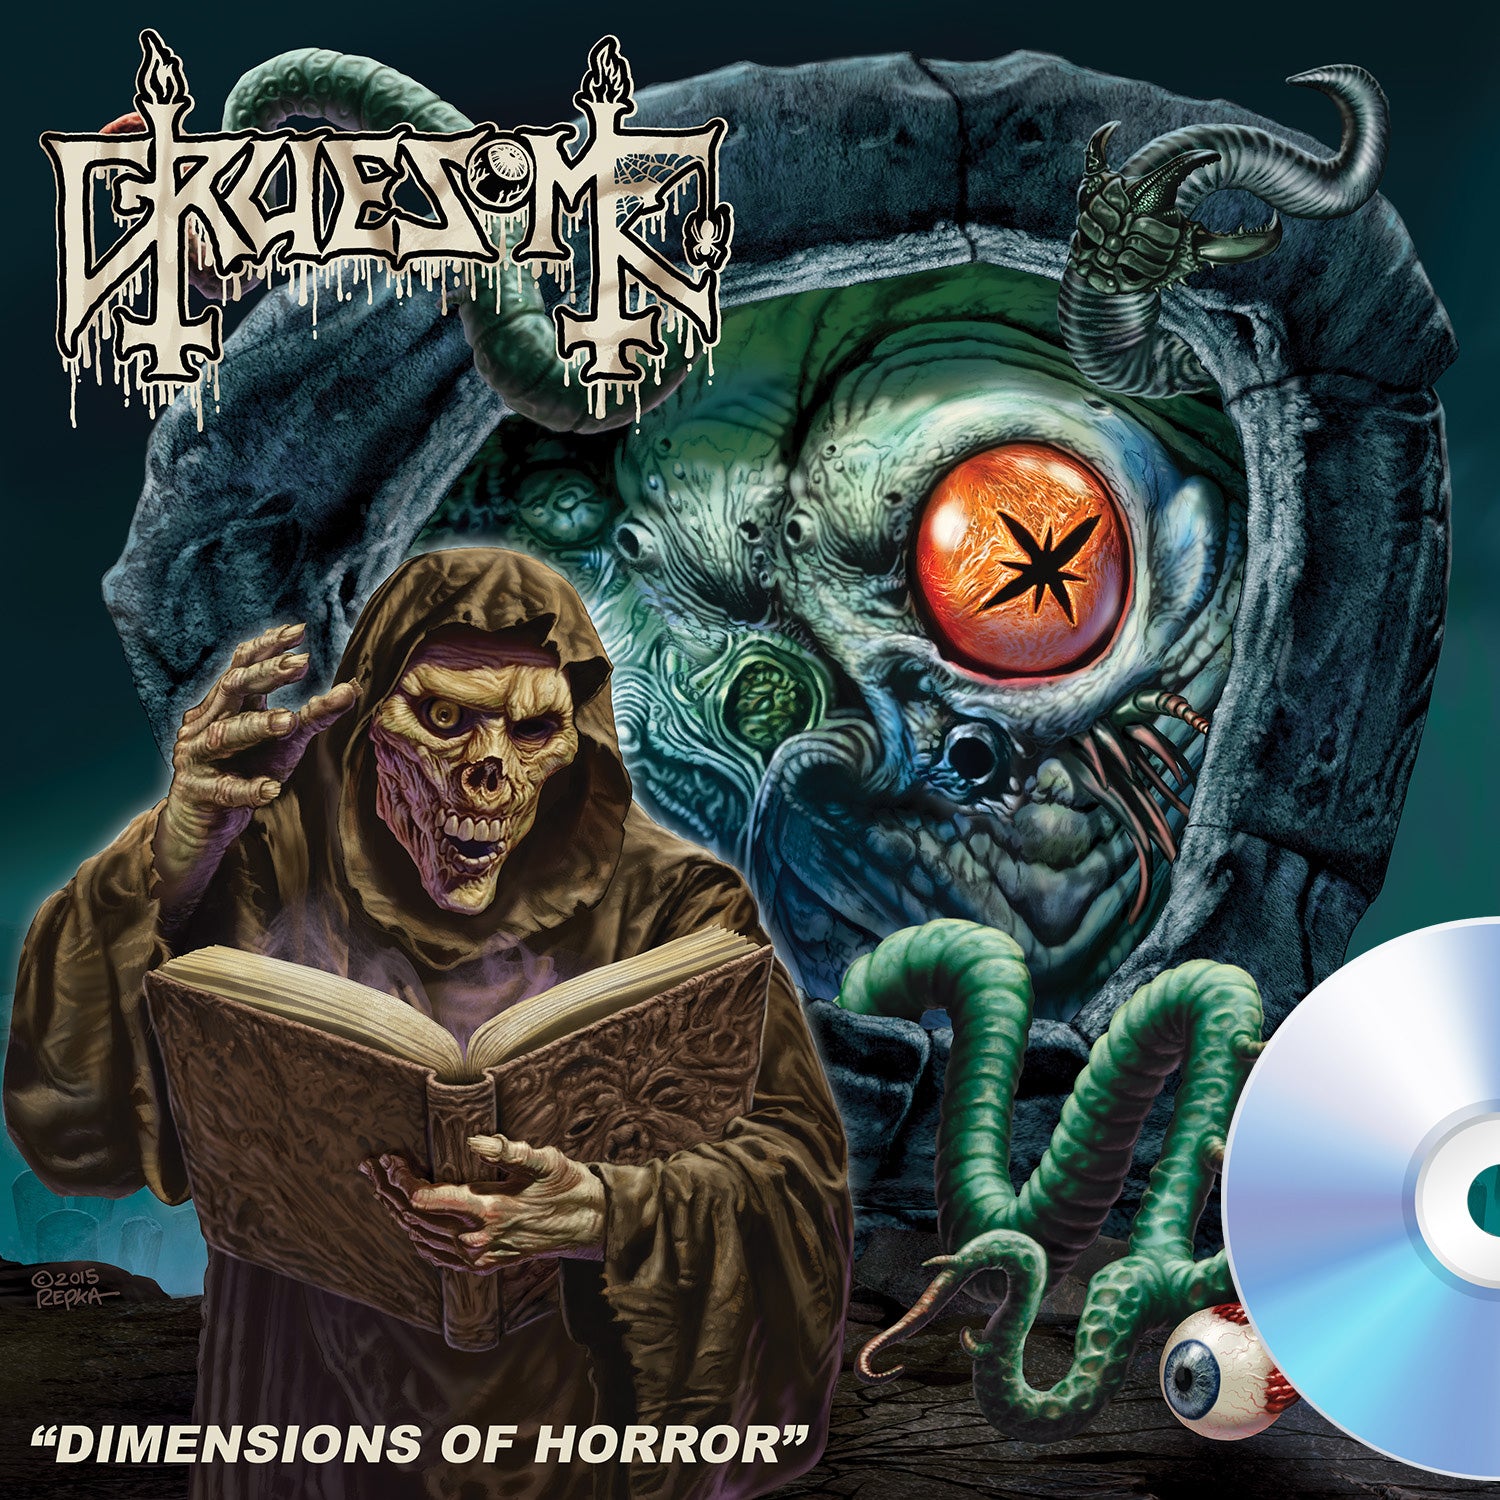 Gruesome "Dimensions of Horror" CD